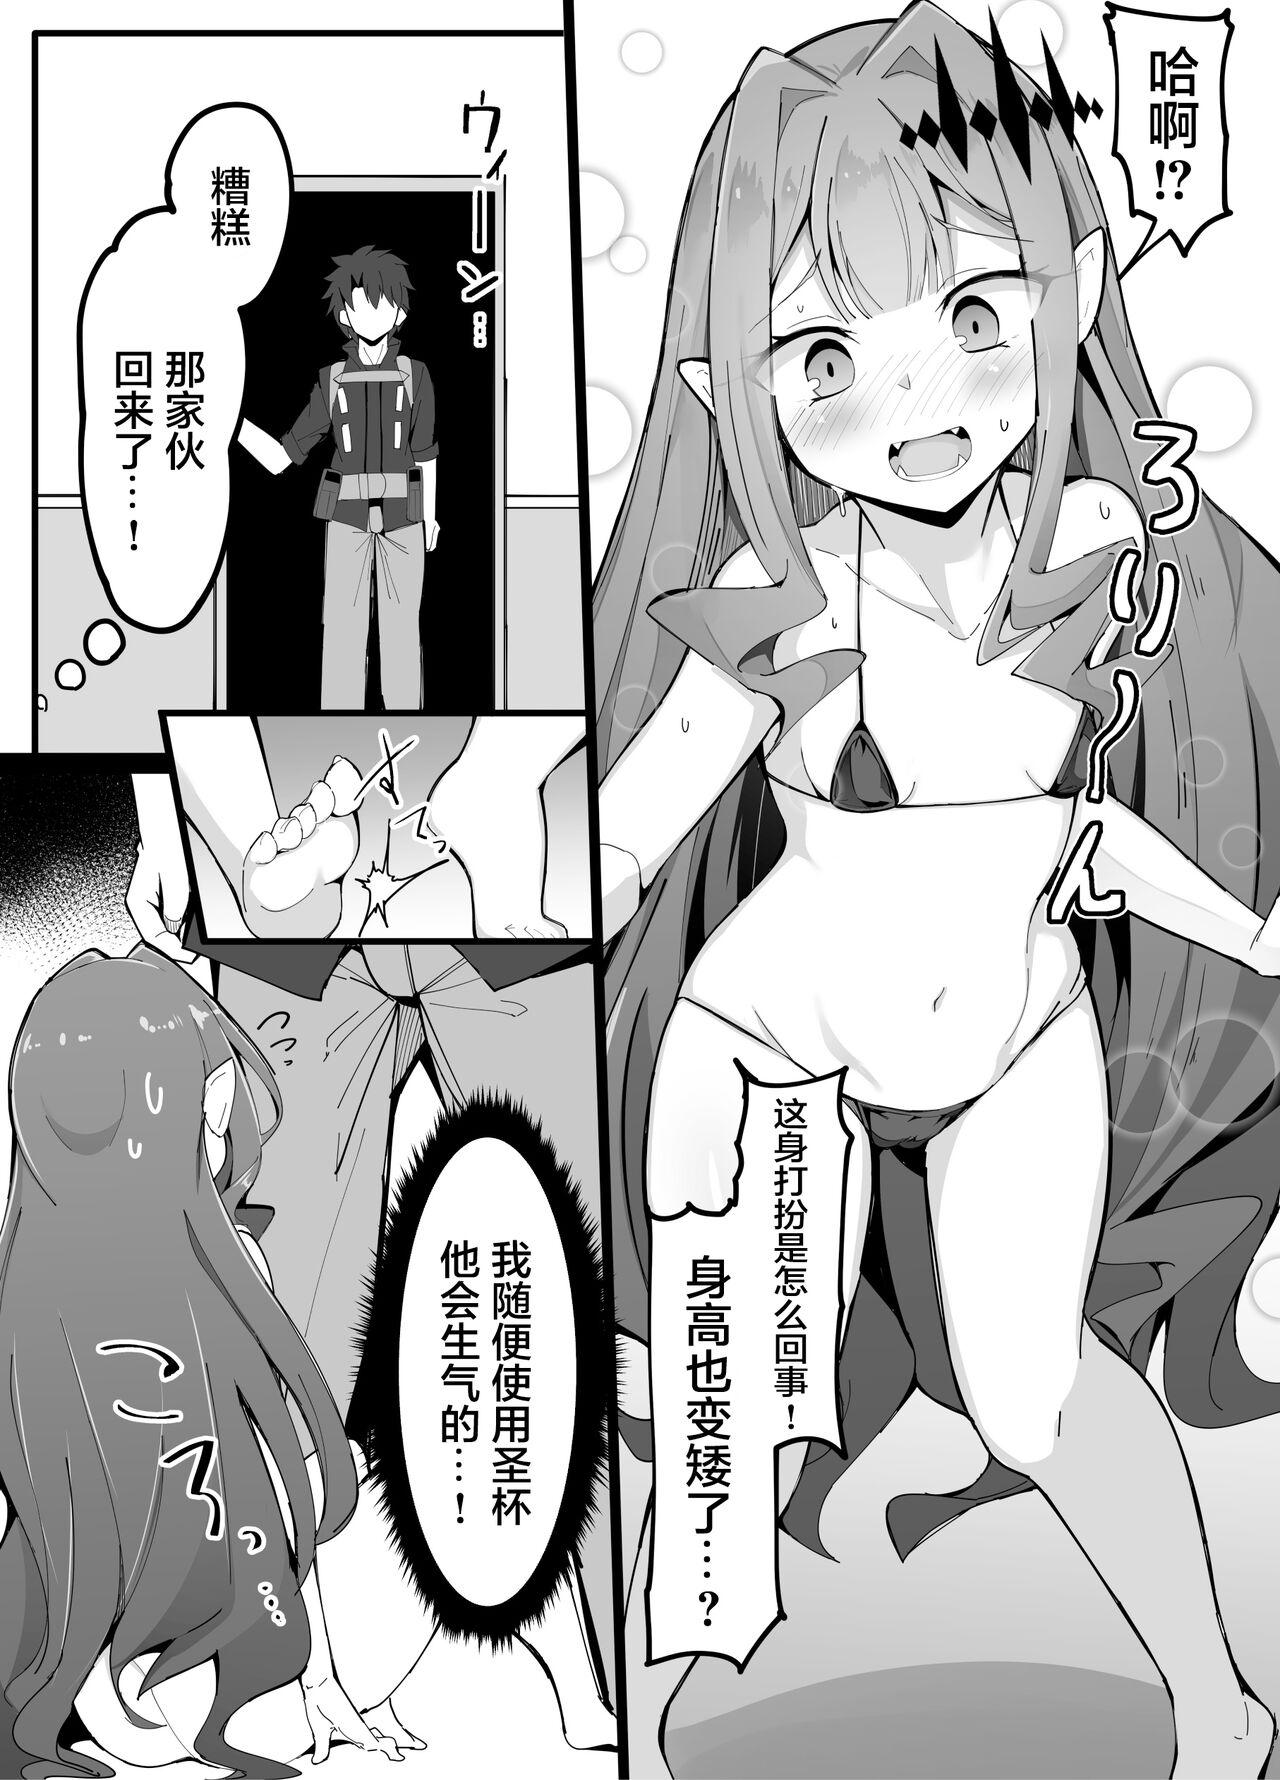 Women 幼精騎士ロリスタン - Fate grand order Celebrity Nudes - Page 4